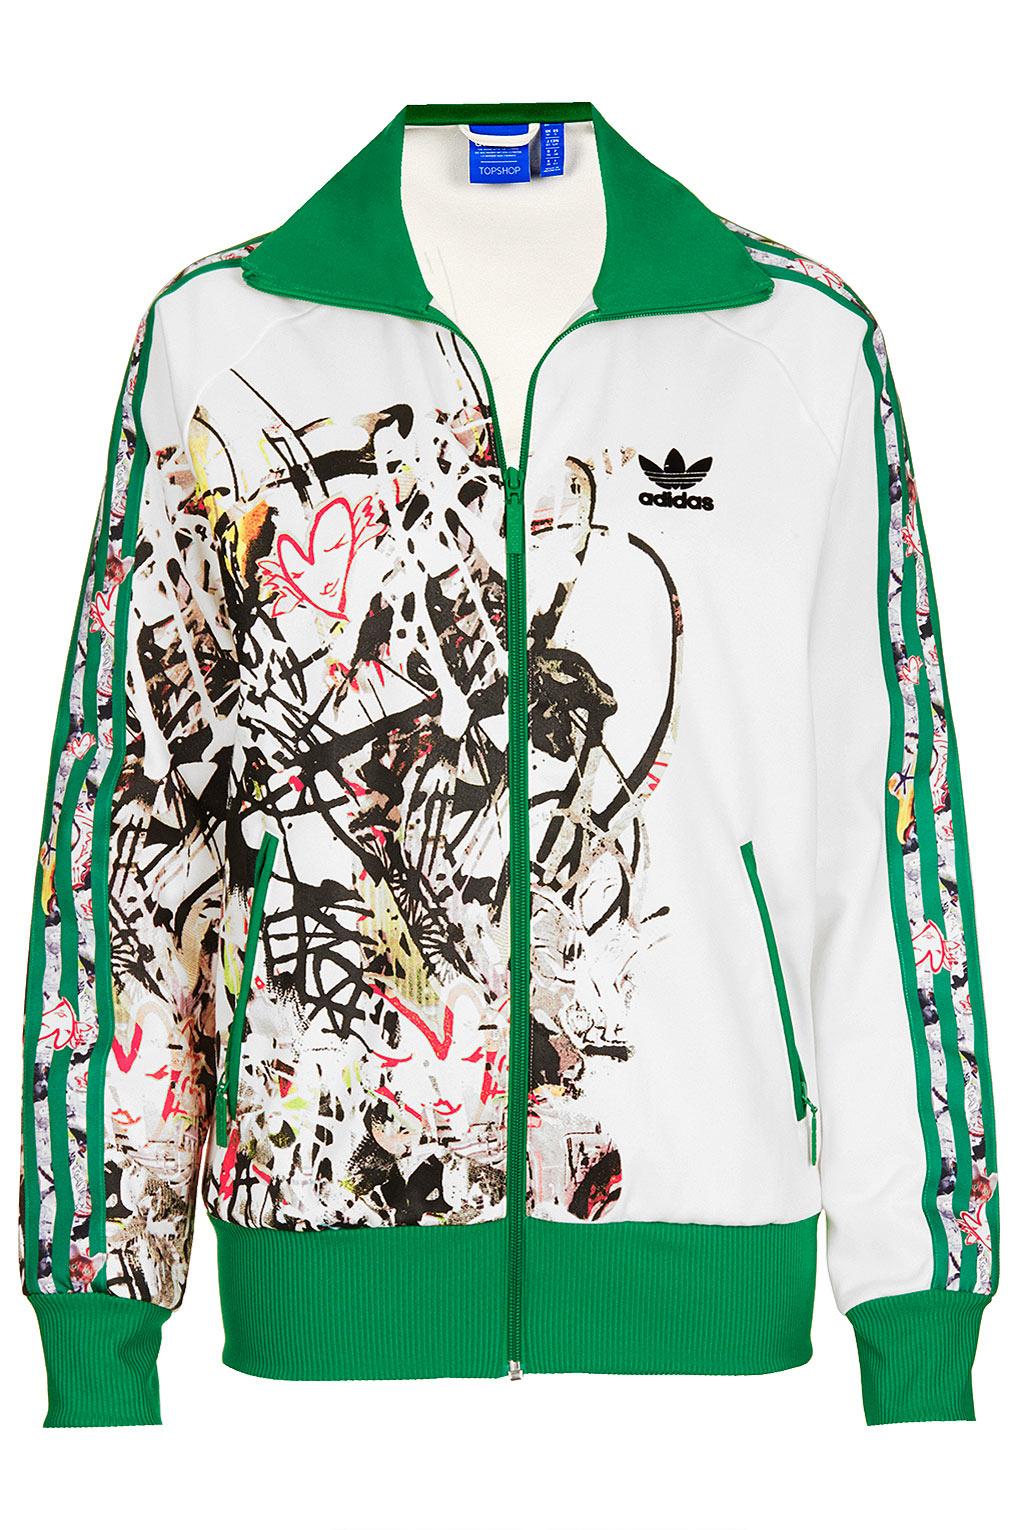 Lyst Topshop Tracksuit  Top By X Adidas  Originals  in Green